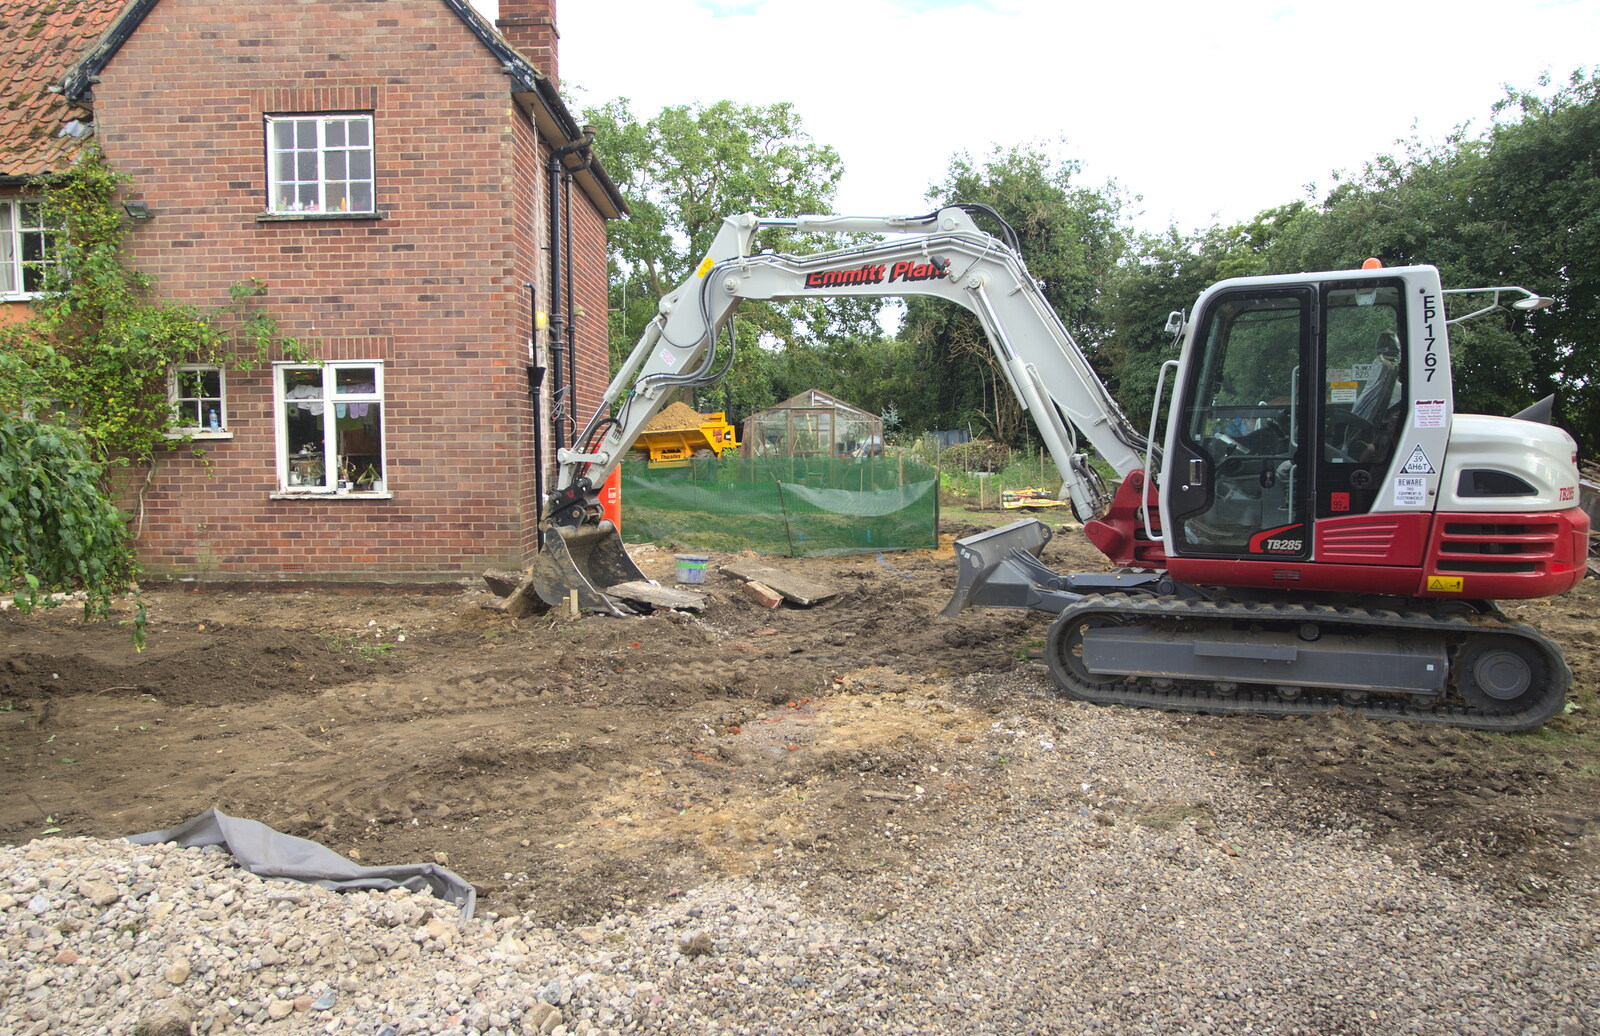 The digger removes the lawn from Grand Designs: Building Commences, Brome, Suffolk - 8th August 2013